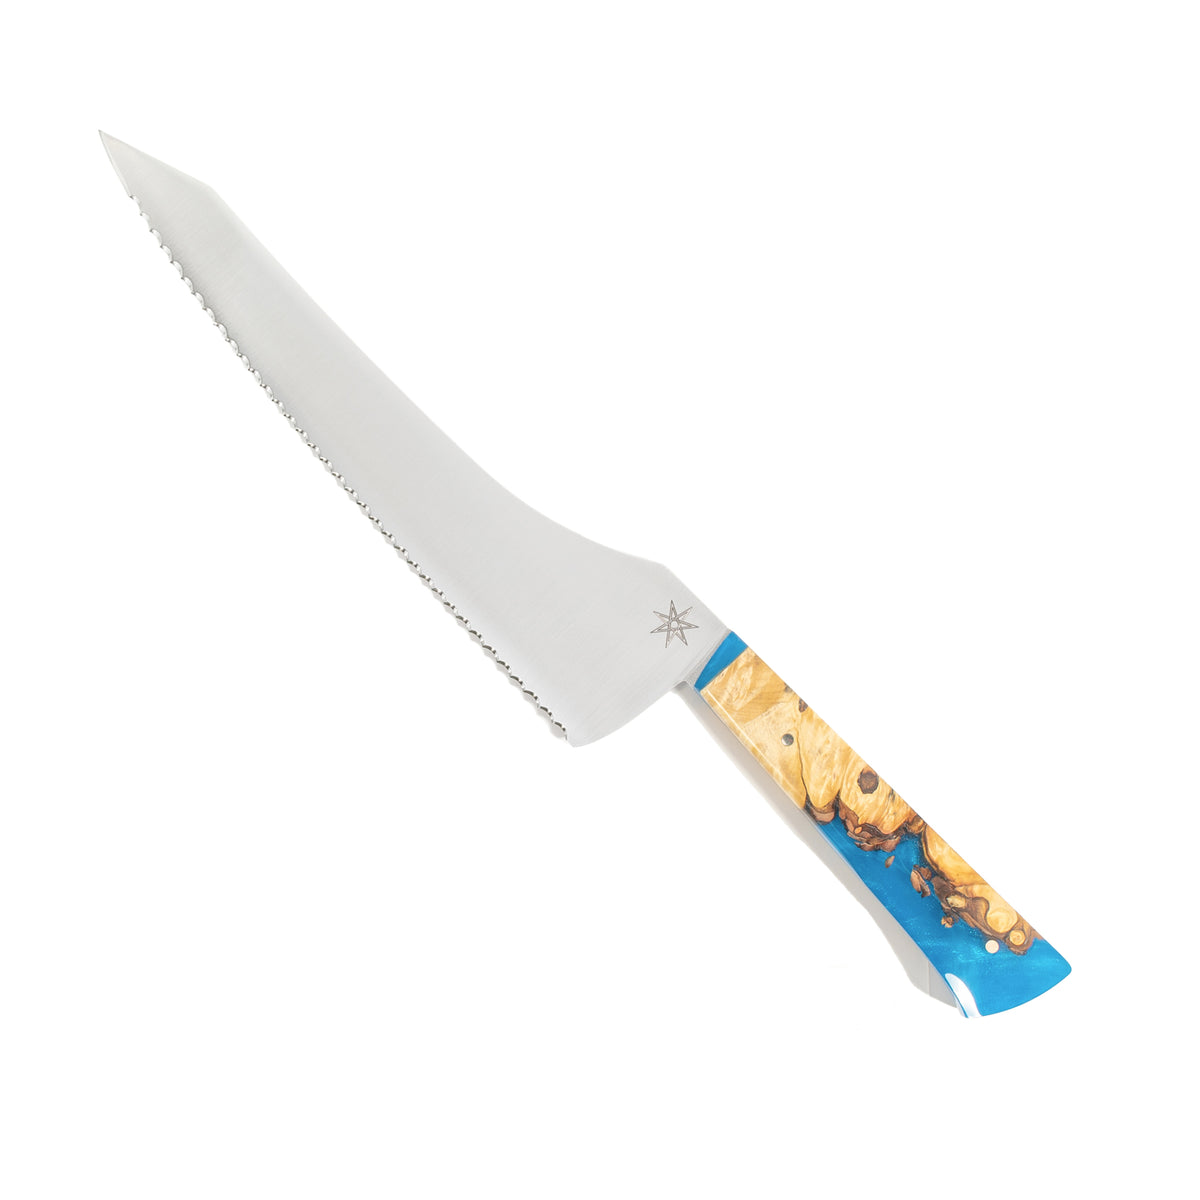 Town Cutler Tahoe Bliss Offset Serrated Bread Knife. Nitro-V stainless steel blade with blue and buckeye burl handle.